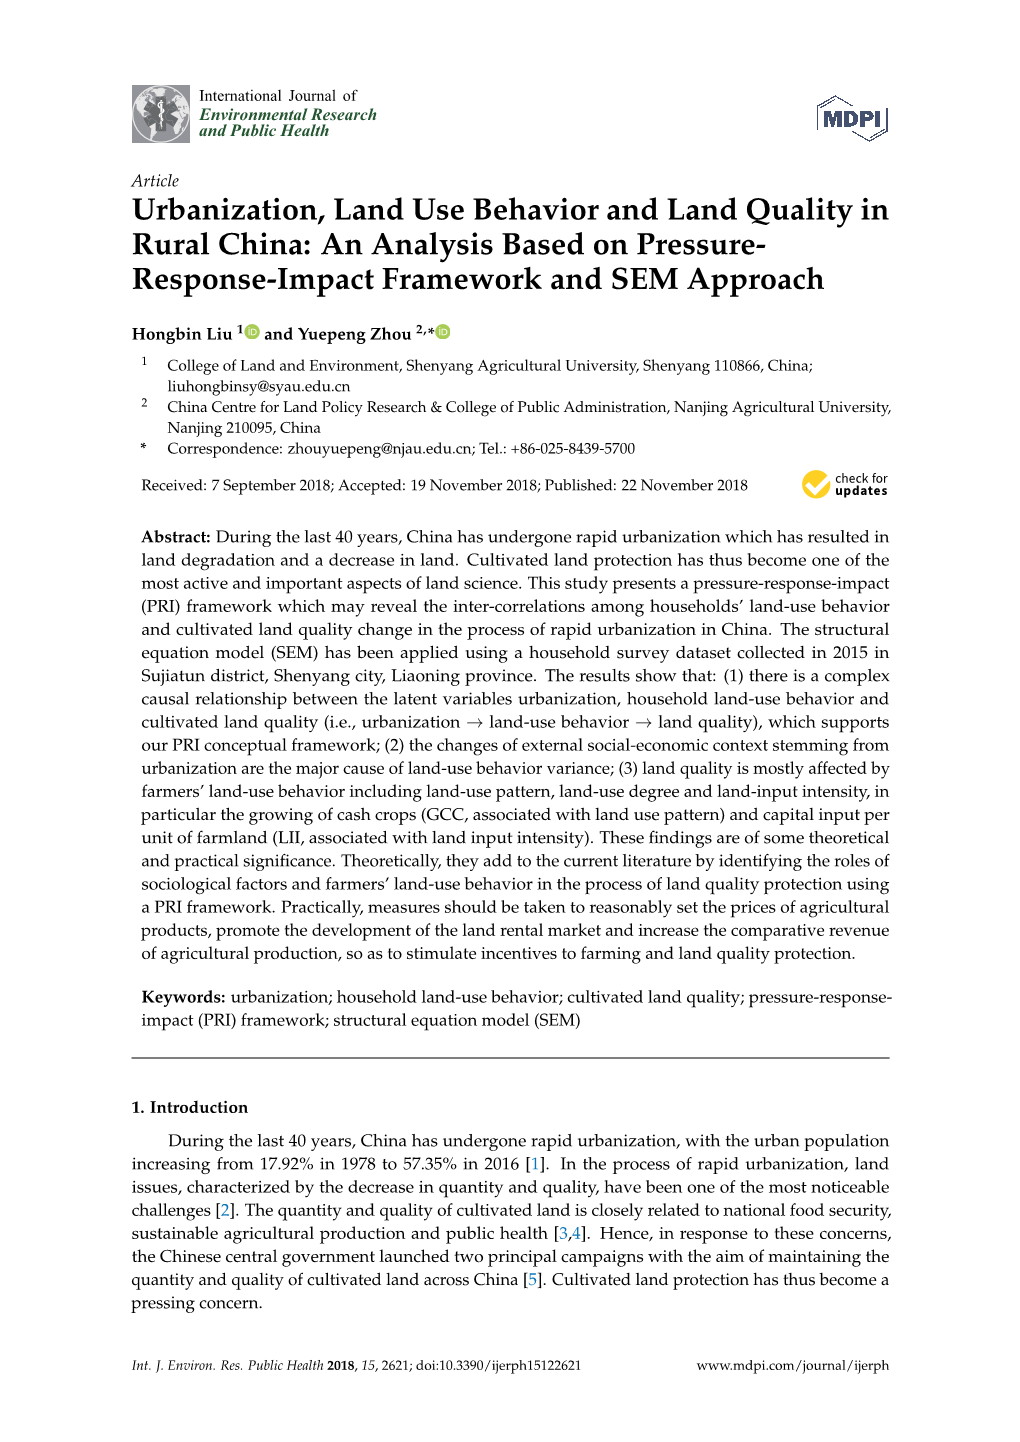 Urbanization, Land Use Behavior and Land Quality in Rural China: an Analysis Based on Pressure- Response-Impact Framework and SEM Approach